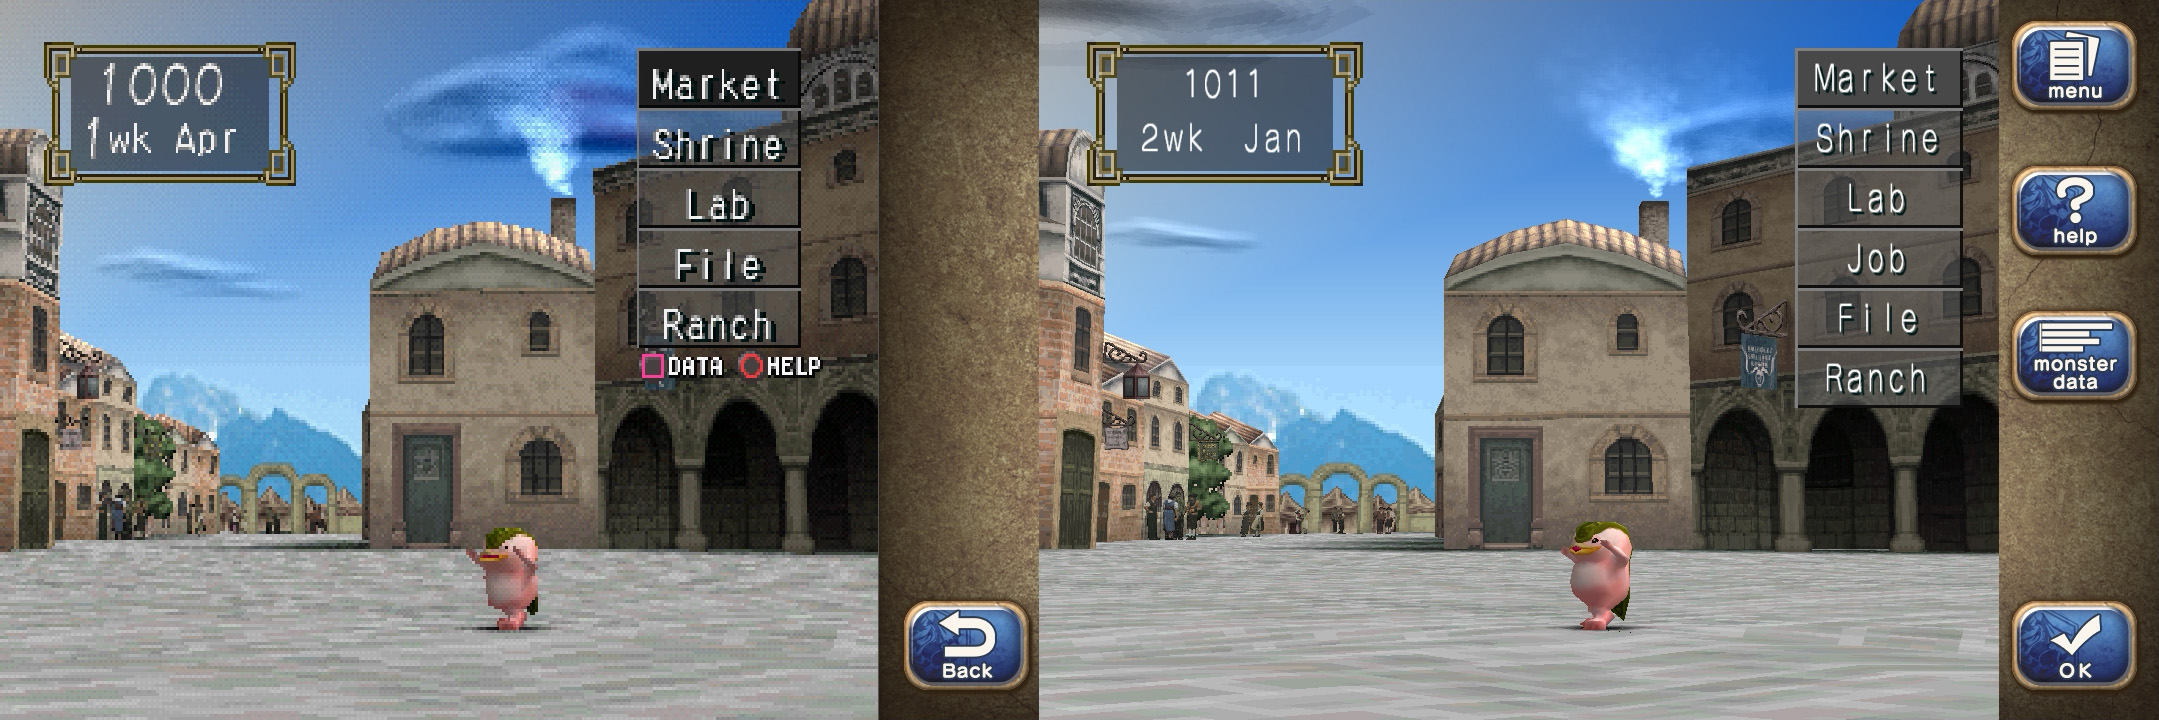 Comparison of Monster Rancher 2 and DX Resolutions